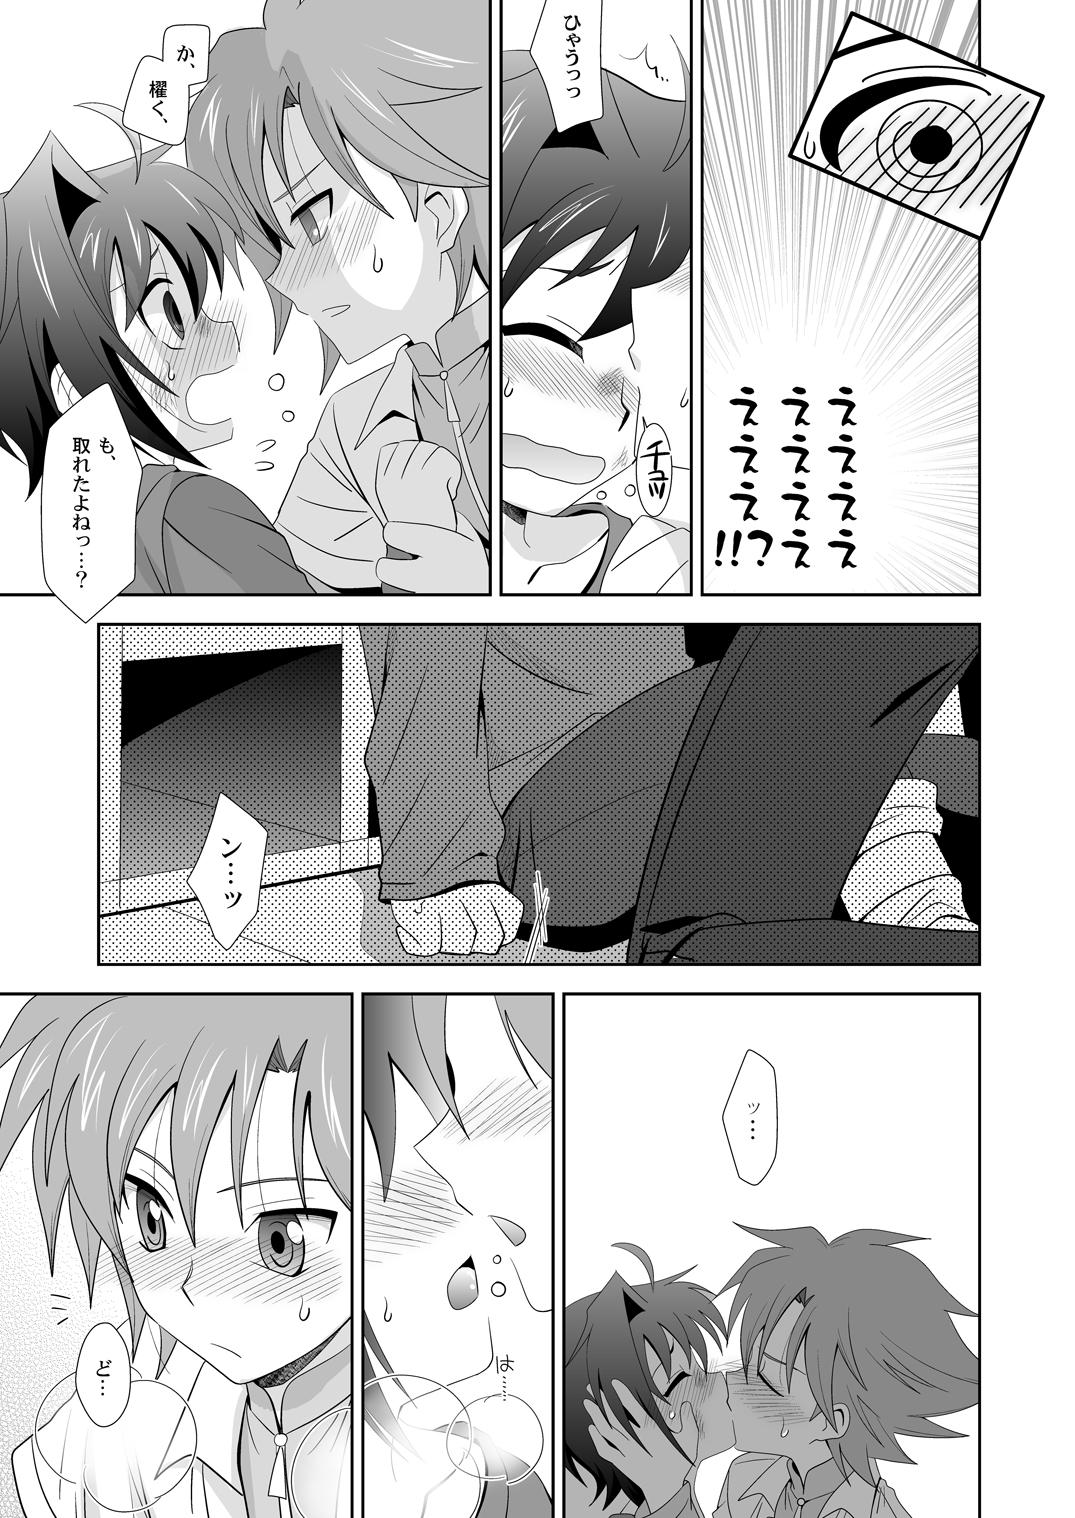 Topless Yuuyake to Coppepan - Cardfight vanguard Officesex - Page 6